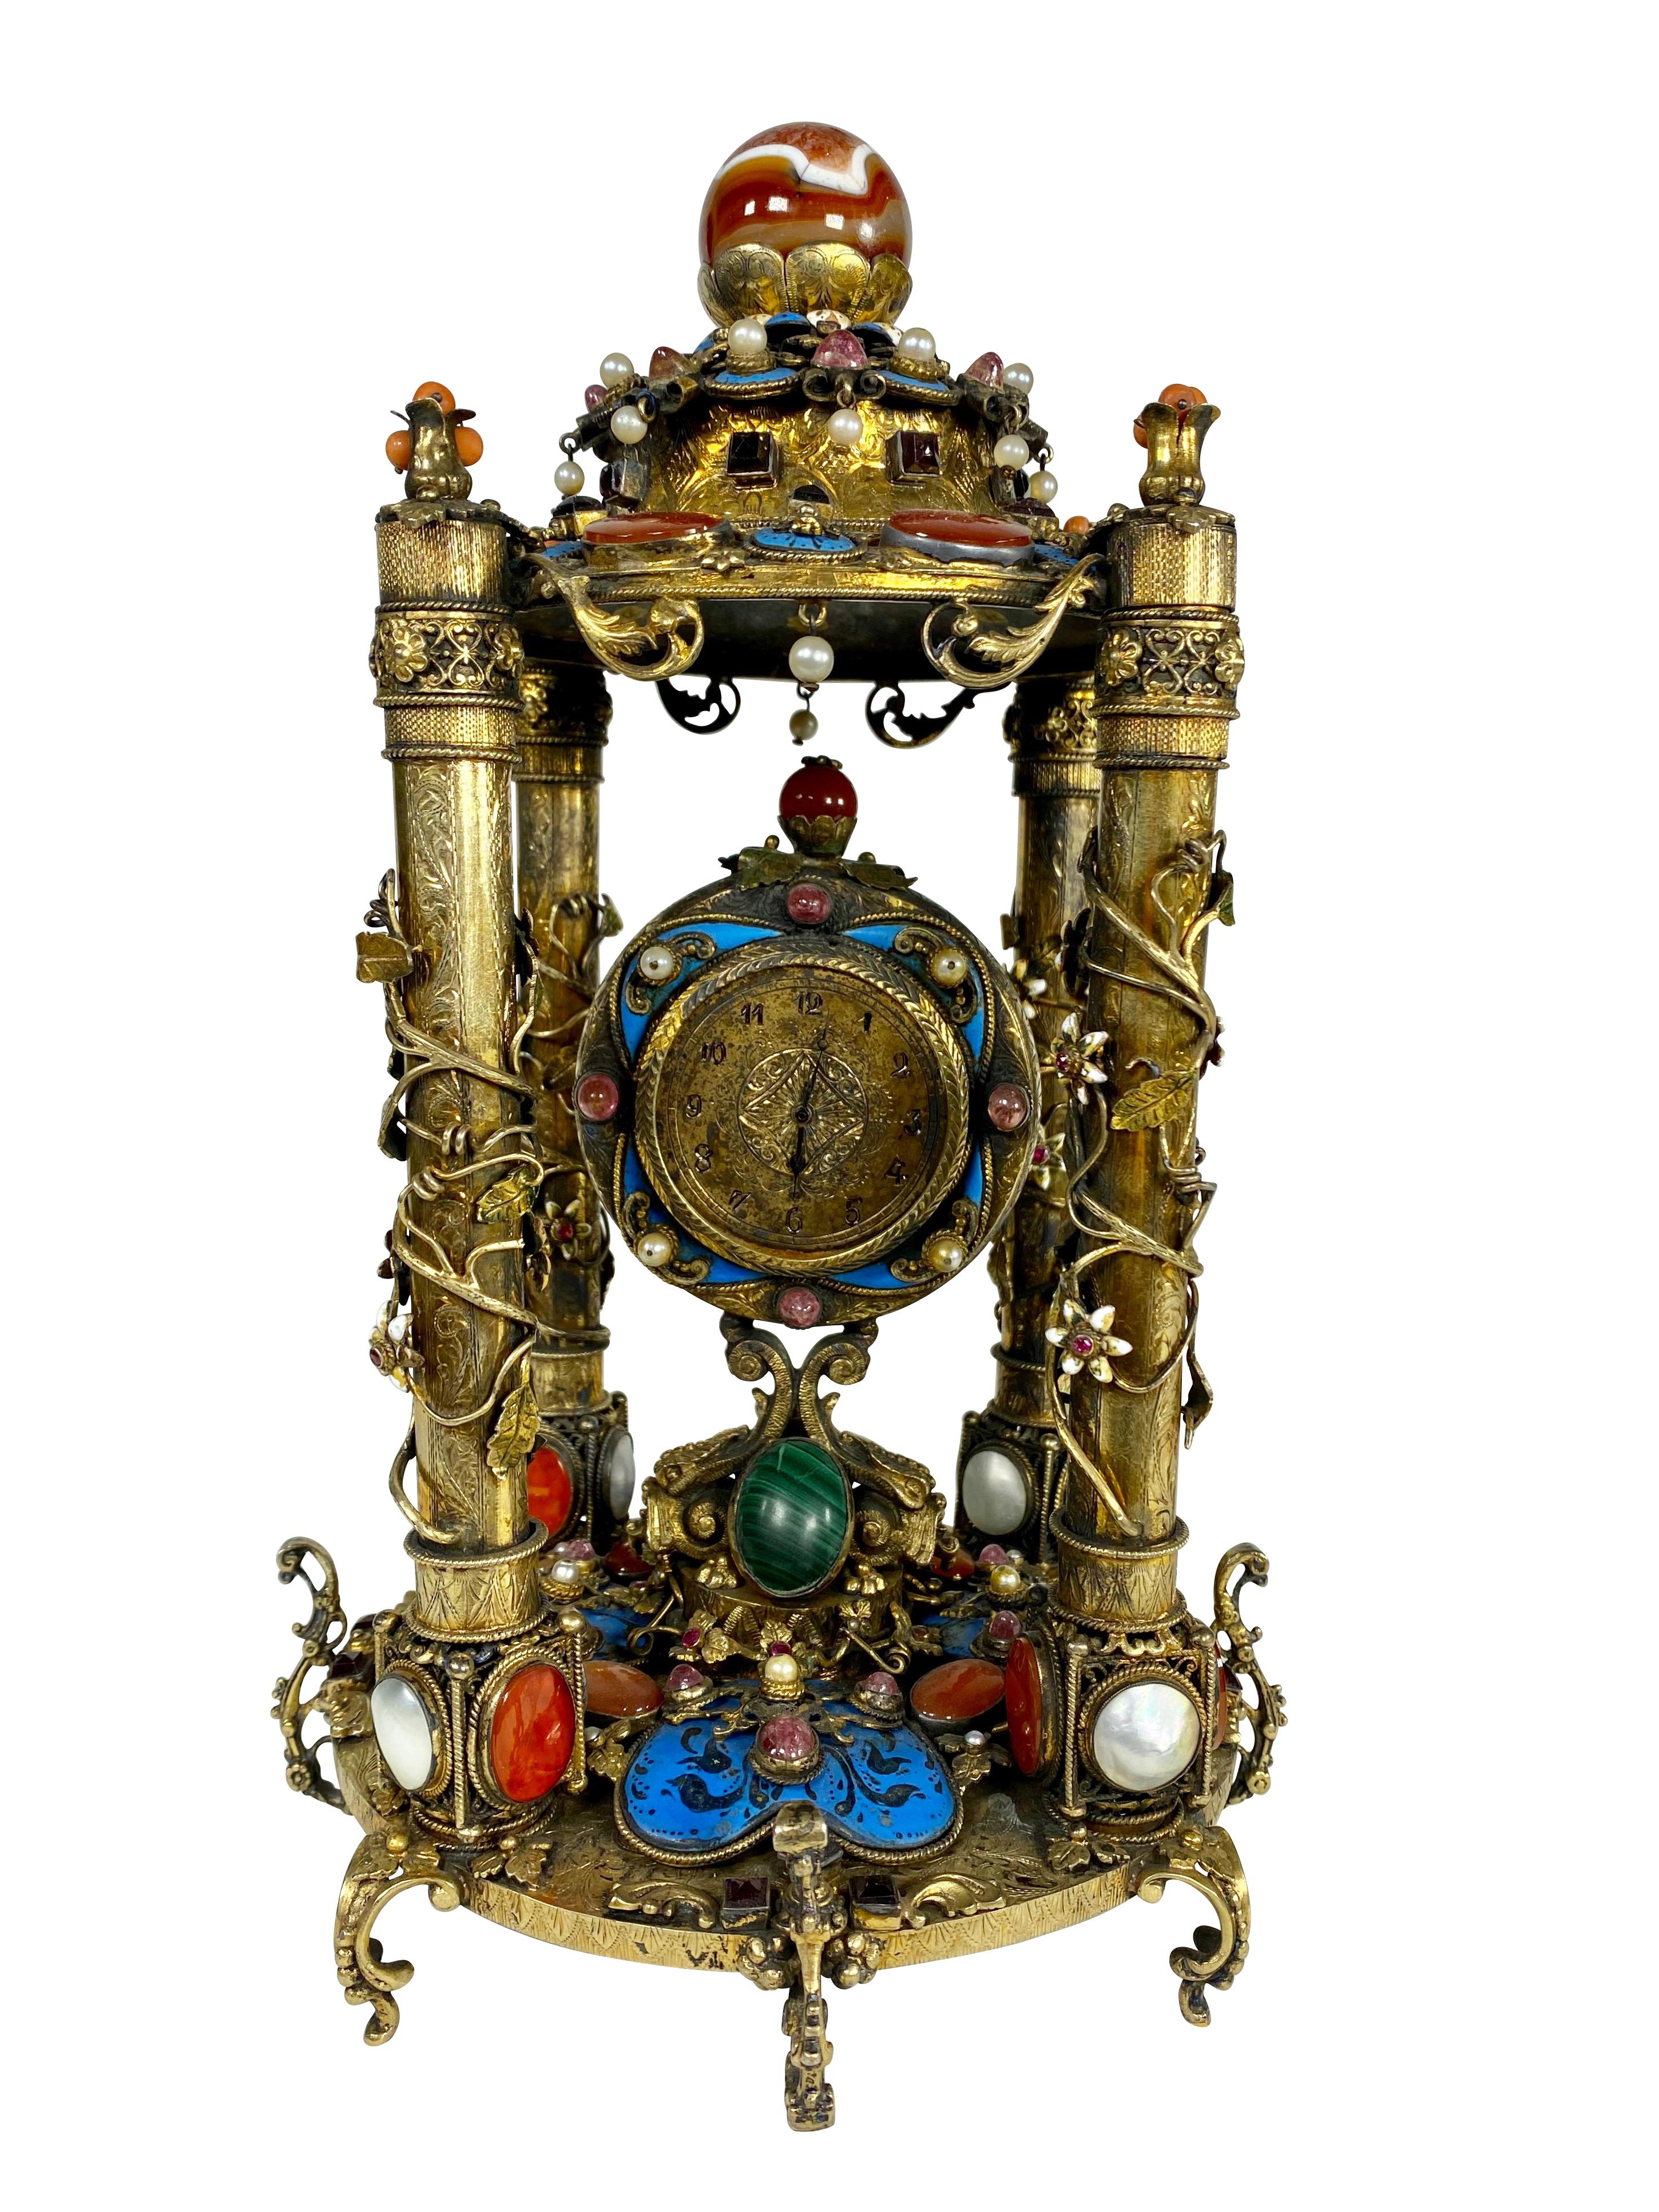 A Rare Austro Hungarian Gilt Silver & Jeweled Table Clock, Circa 1900, having semi precious stones throughout including agate, malachite, amethyst, pearl, coral and enamel DIMENSIONS: HEIGHT: 11 DIAMETER 7